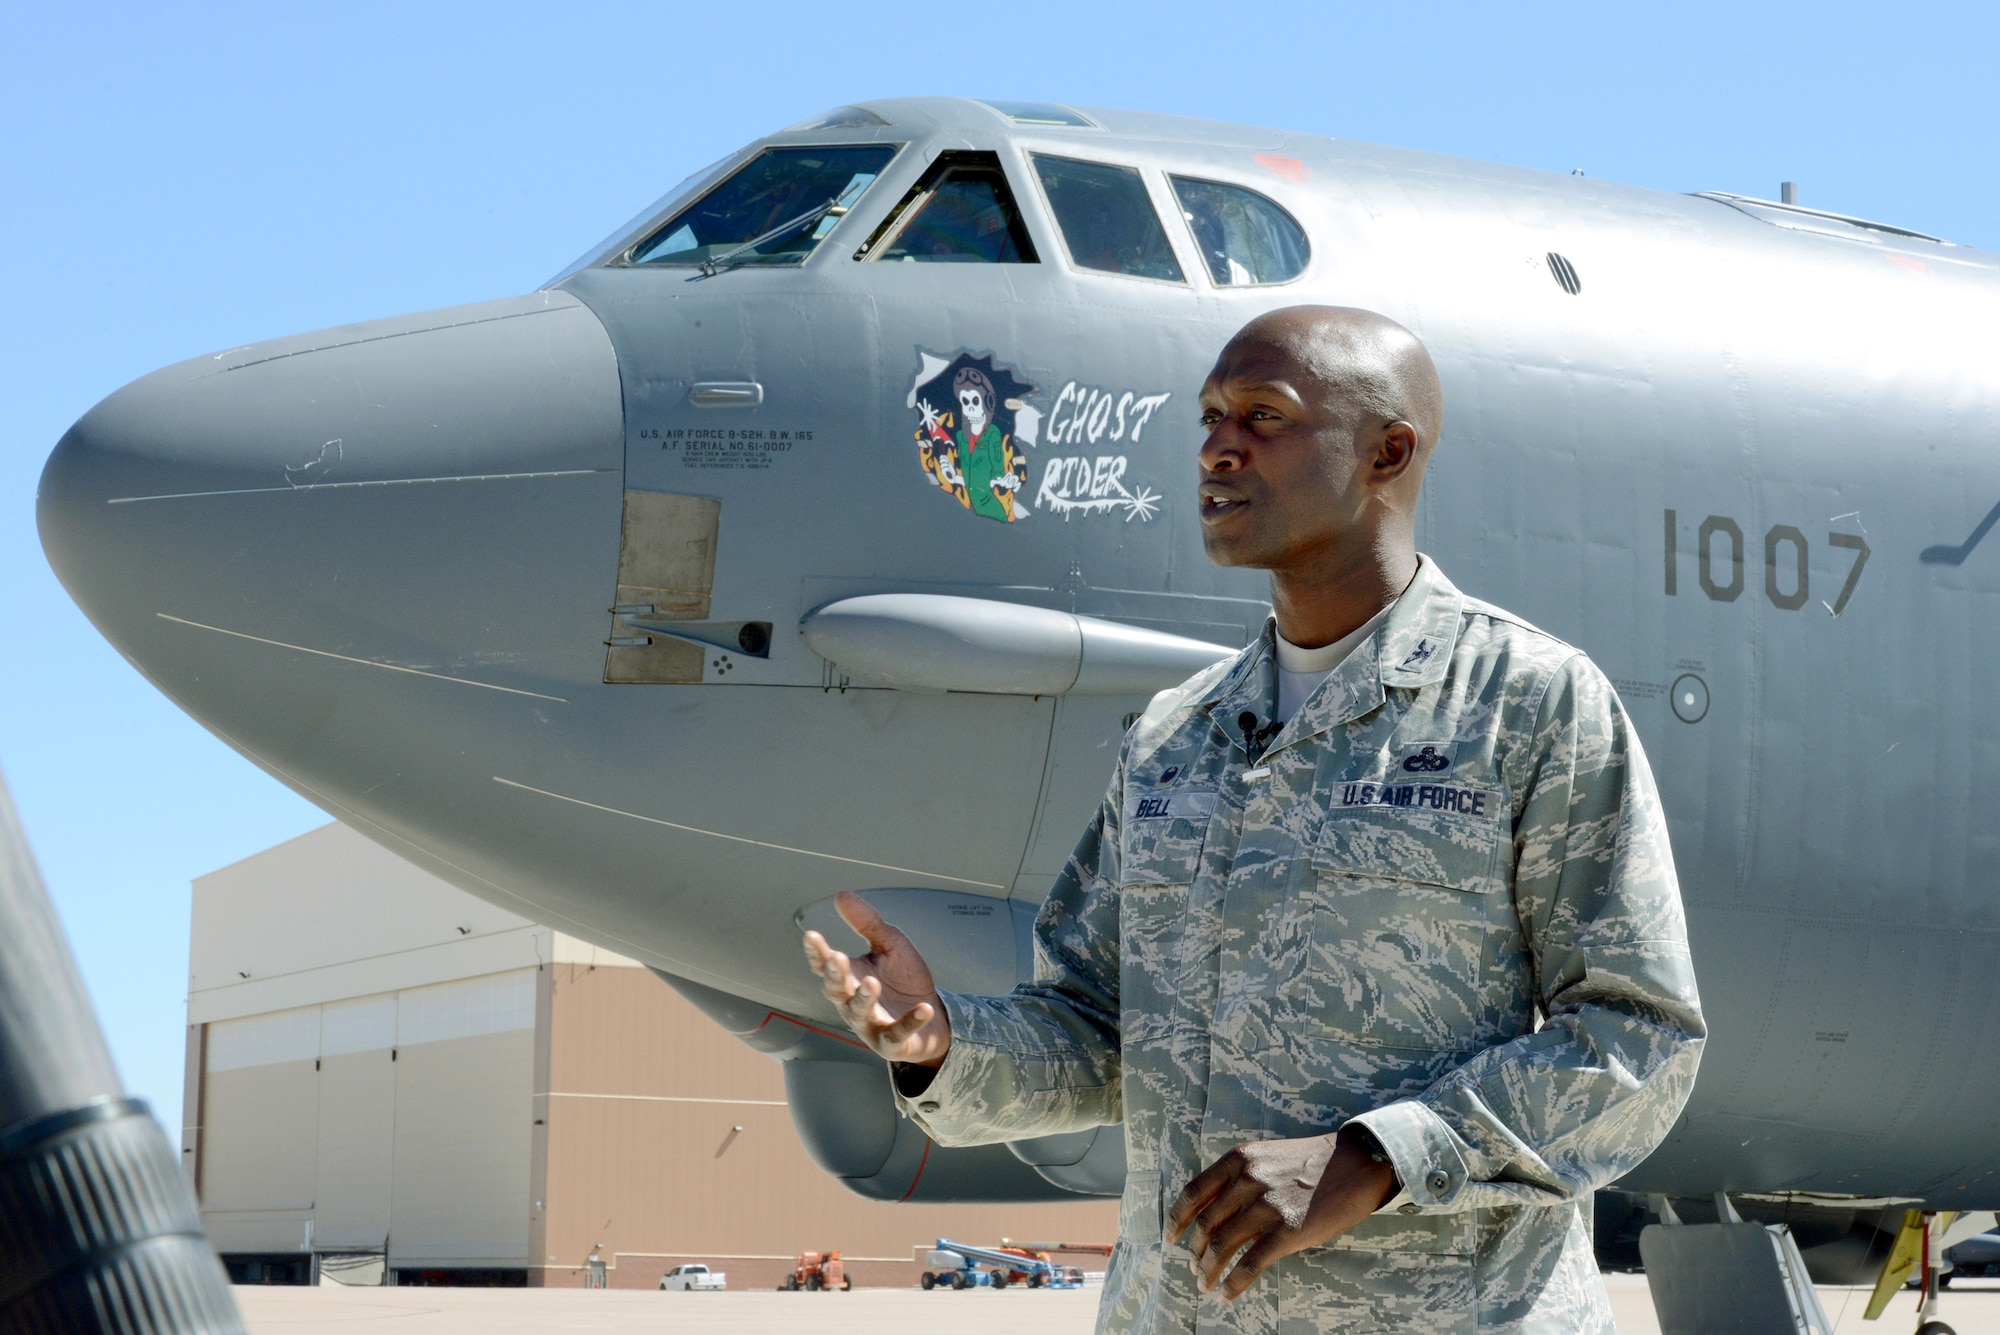 Col. Kenyon Bell, 76th Aircraft Maintenance Group commander, addresses the media Sept. 27, before “Ghost Rider” left Tinker Air Force Base for Minot AFB, N.D. “Ghost Rider,” a B-52H Stratofortress that was pulled from long-term storage at the 309th Aerospace Maintenance and Regeneration Group at Davis-Monthan AFB, Ariz., arrived at Tinker Air Force Base in December 2015. The historic aircraft spent the last nine months undergoing extensive repairs in programmed depot maintenance here. The work was completed 90 days ahead of schedule.  (Air Force photo by Kelly White)